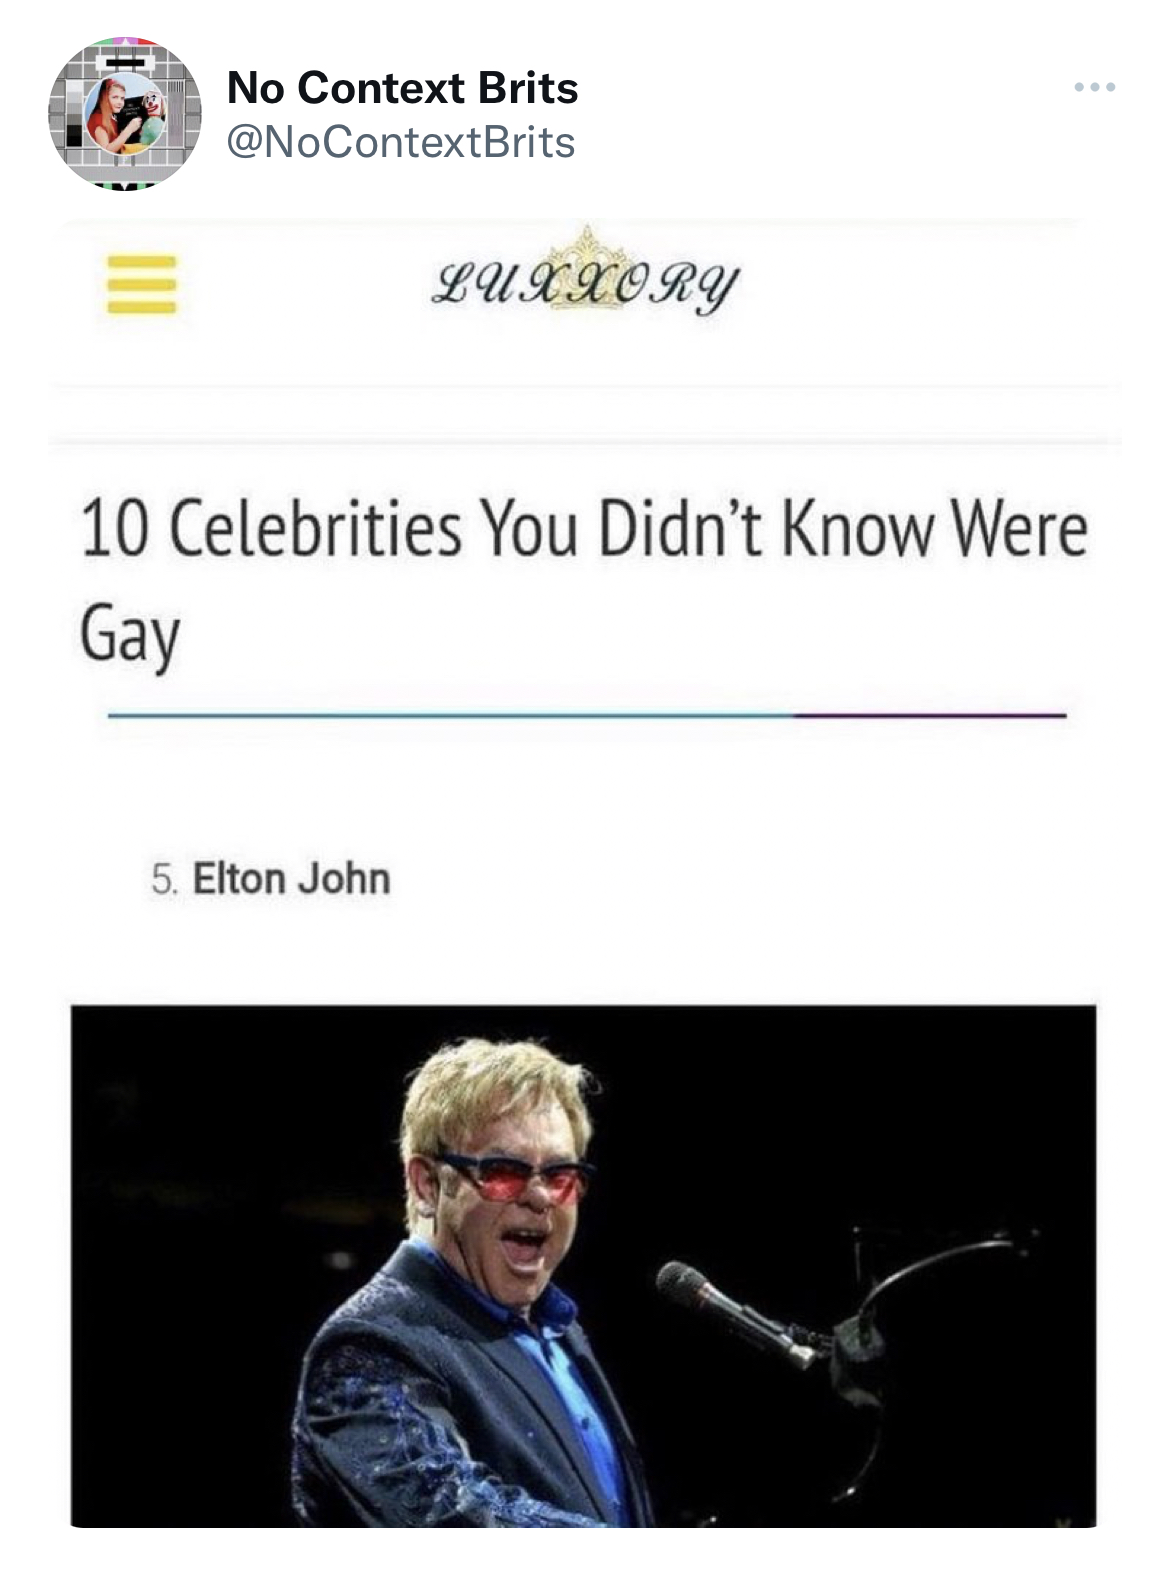 media - In No Context Brits Luxxory 10 Celebrities You Didn't Know Were Gay 5. Elton John